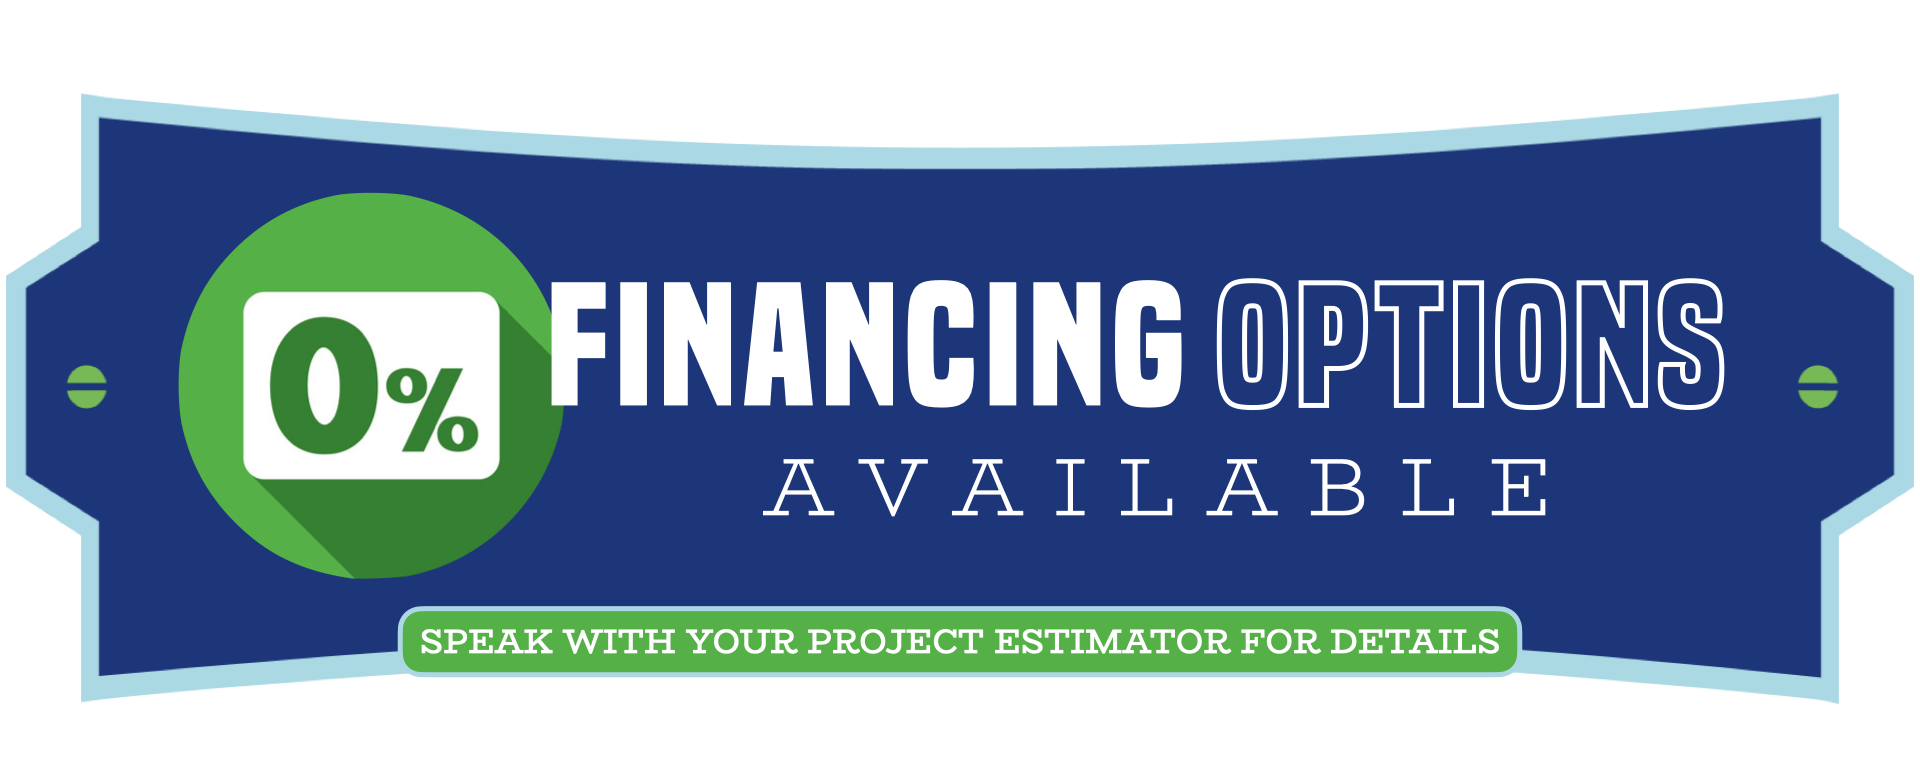 0% Financing Options Available